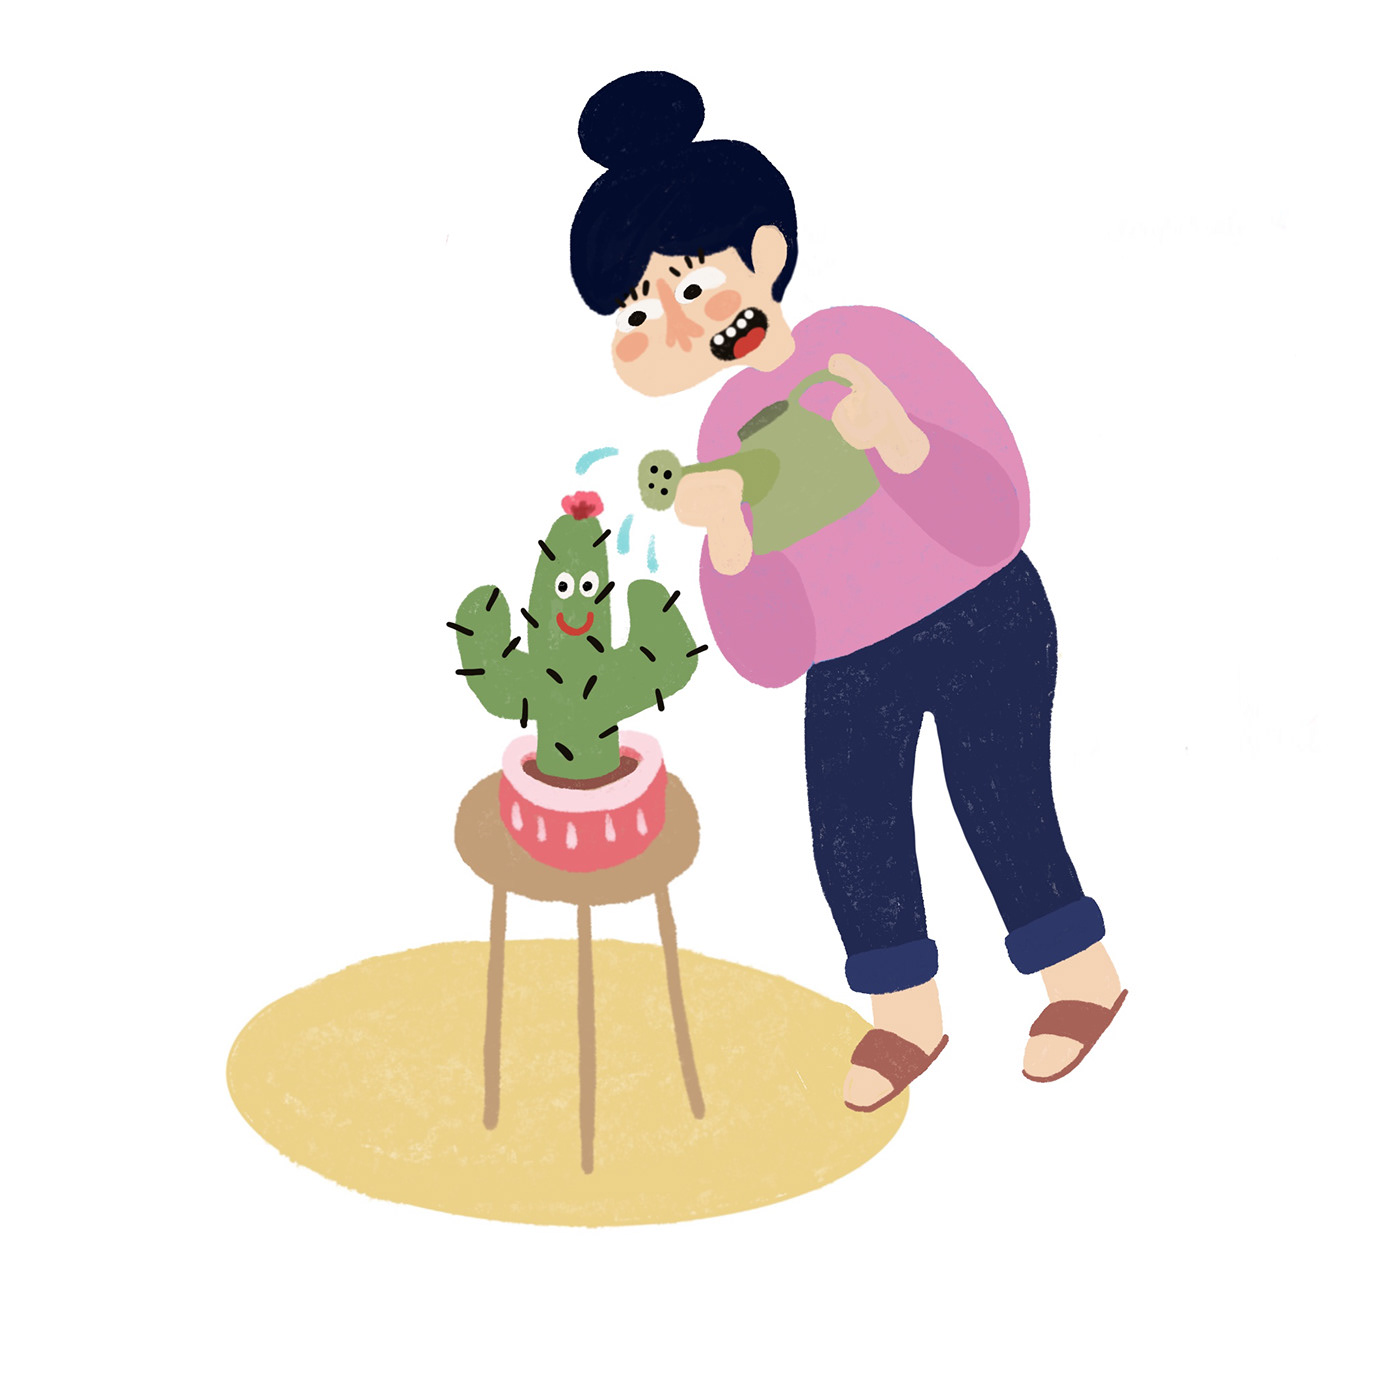 art cactus Character funny ILLUSTRATION  Procreate vector